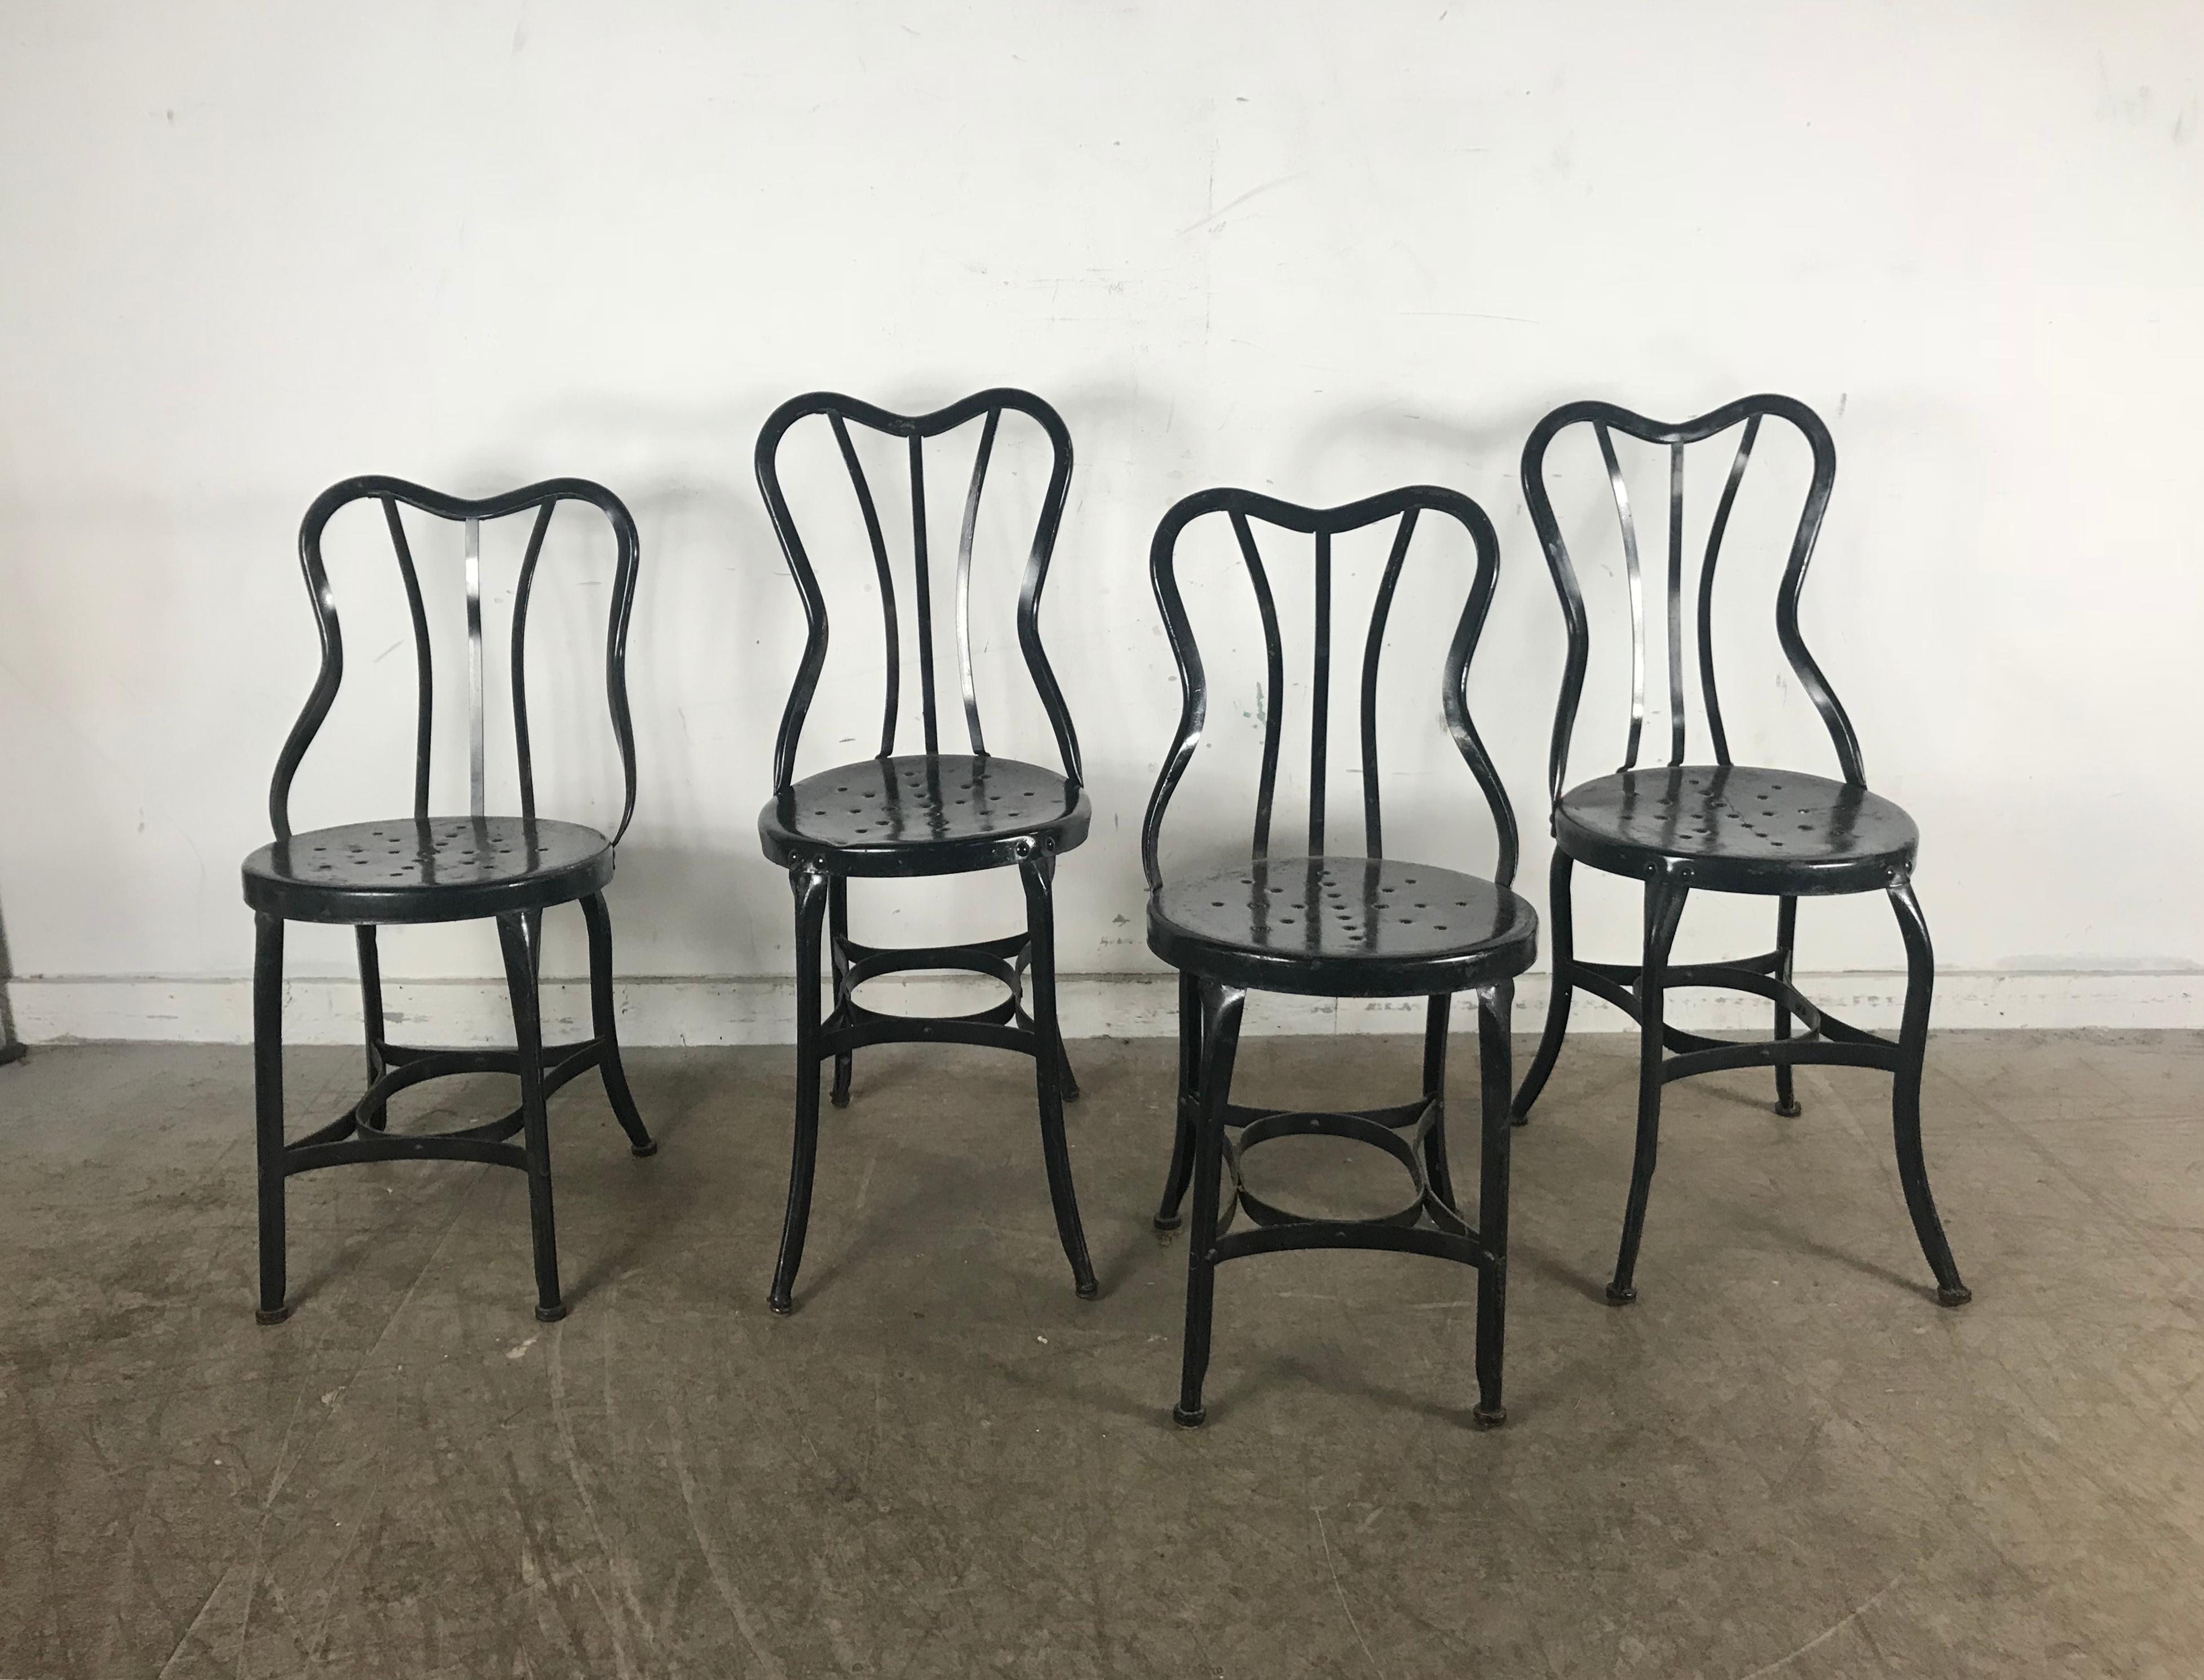 Set of 4 classic industrial metal side chairs by Ohio Steel, pressed painted steel, retain original finish and patina.